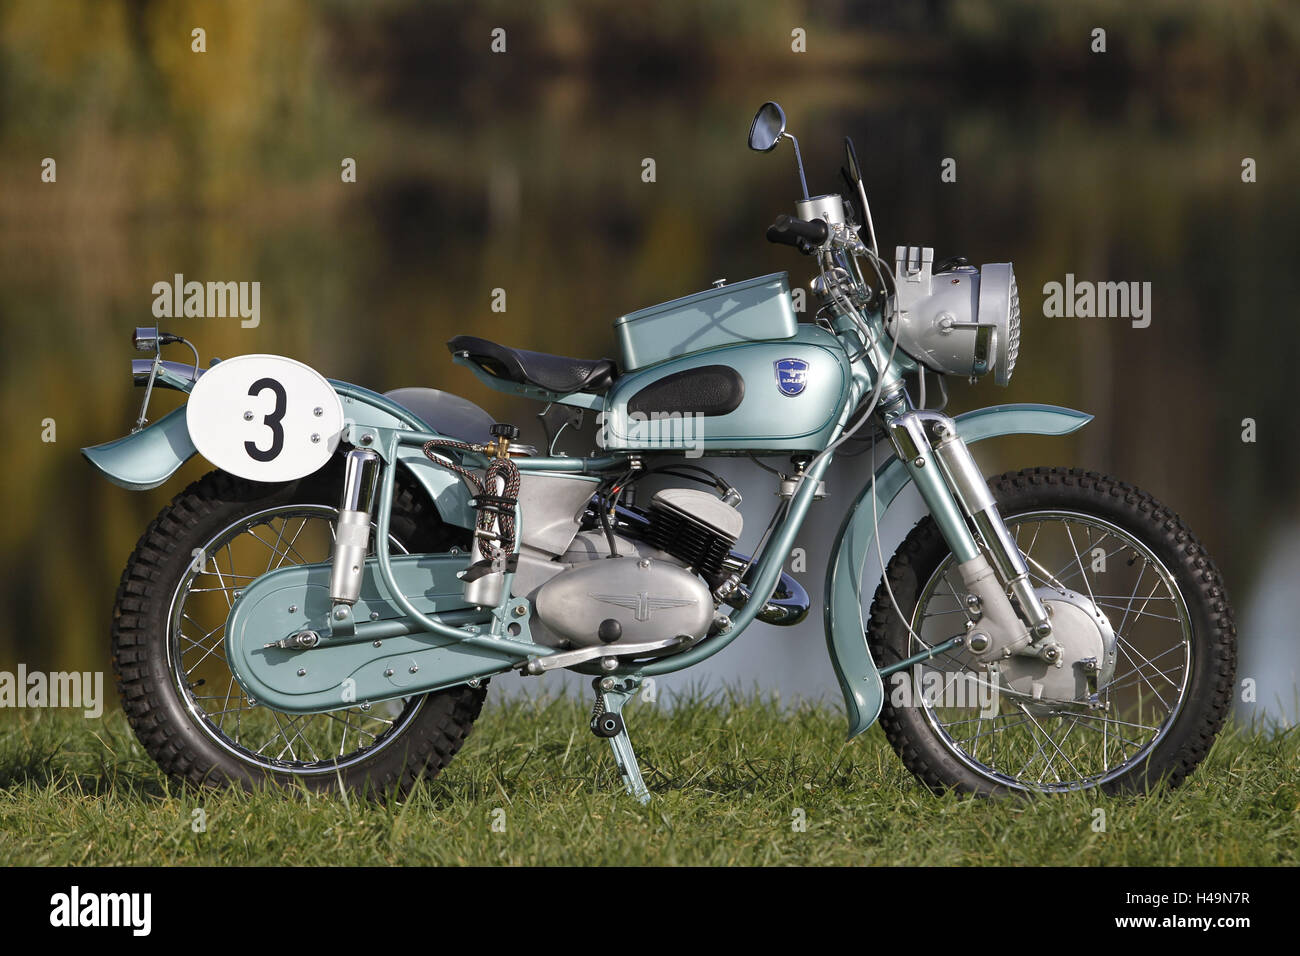 Motorcycle, Adler, vintage motorcycle, year of manufacture unknown, standing, right side, Stock Photo